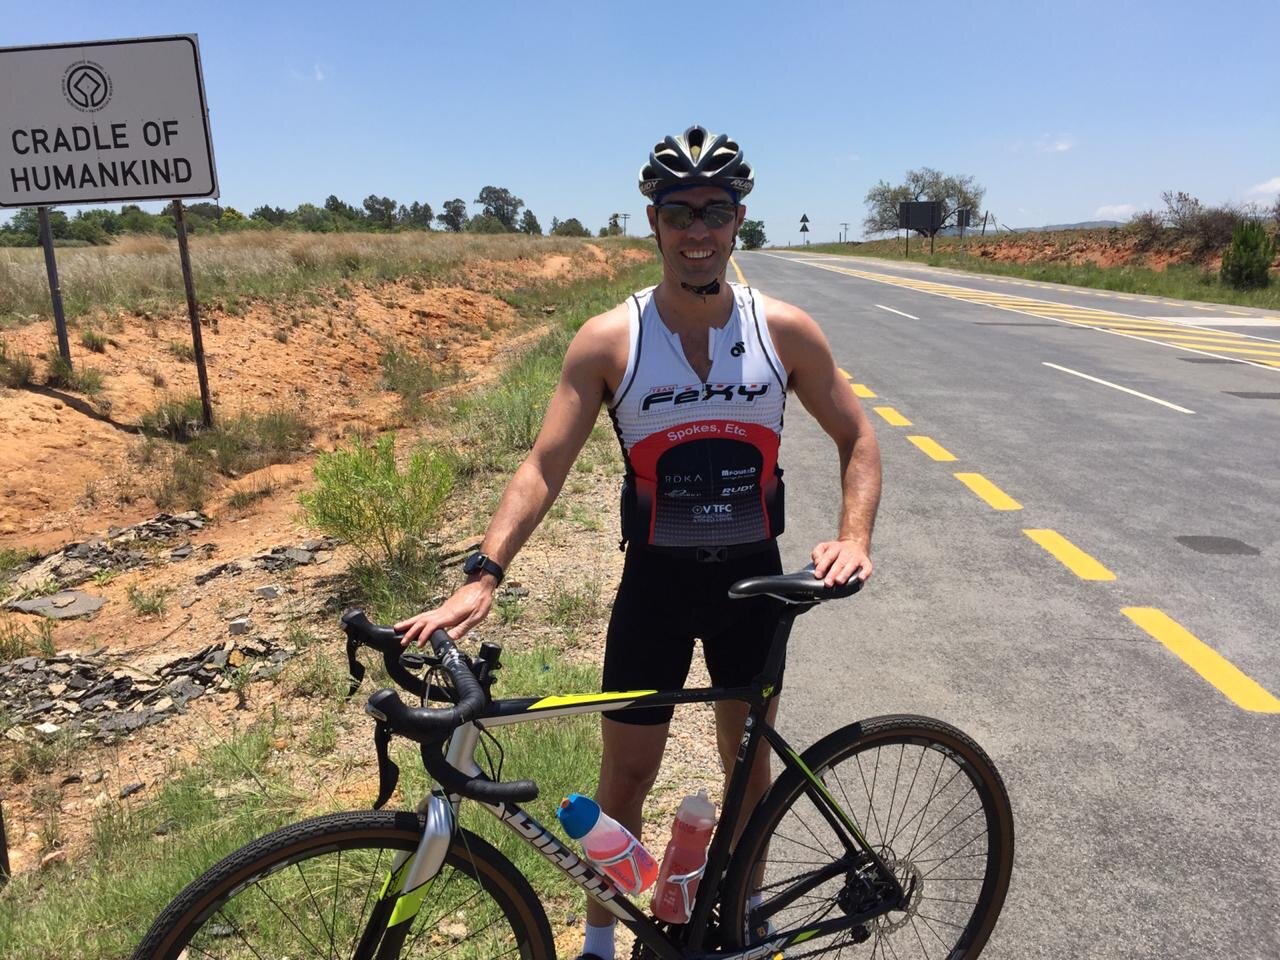 Wiehan went for a bike ride together with two friends in the Cradle of Humankind